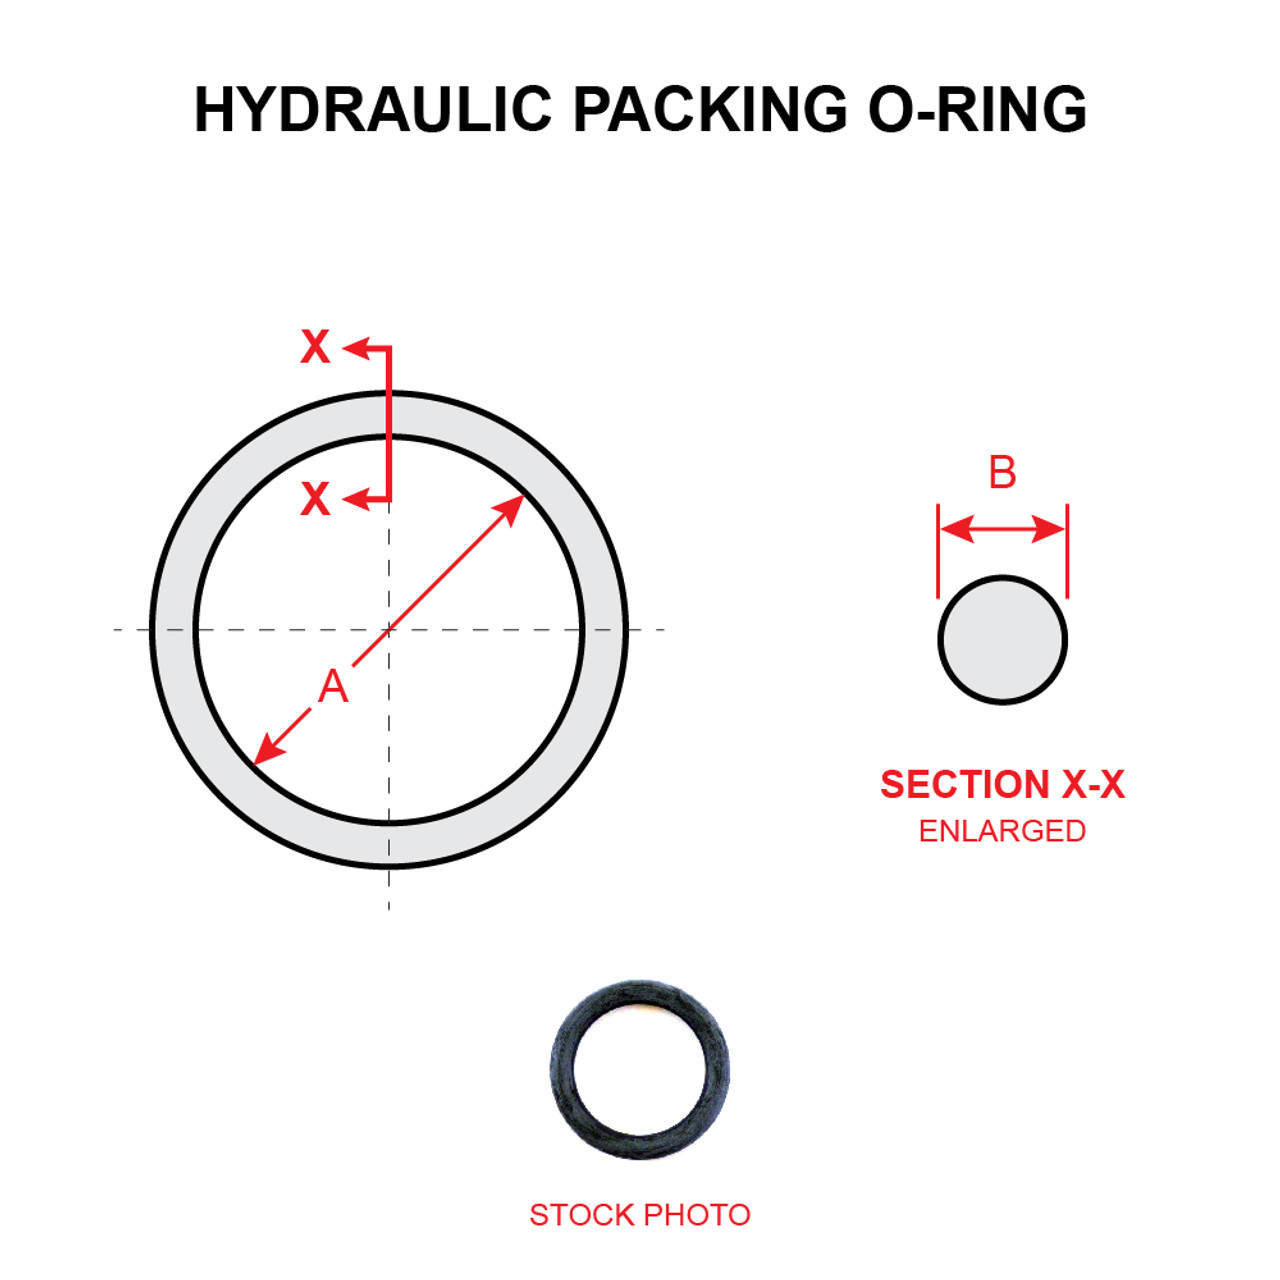 MS28775-225   HYDRAULIC PACKING O-RING